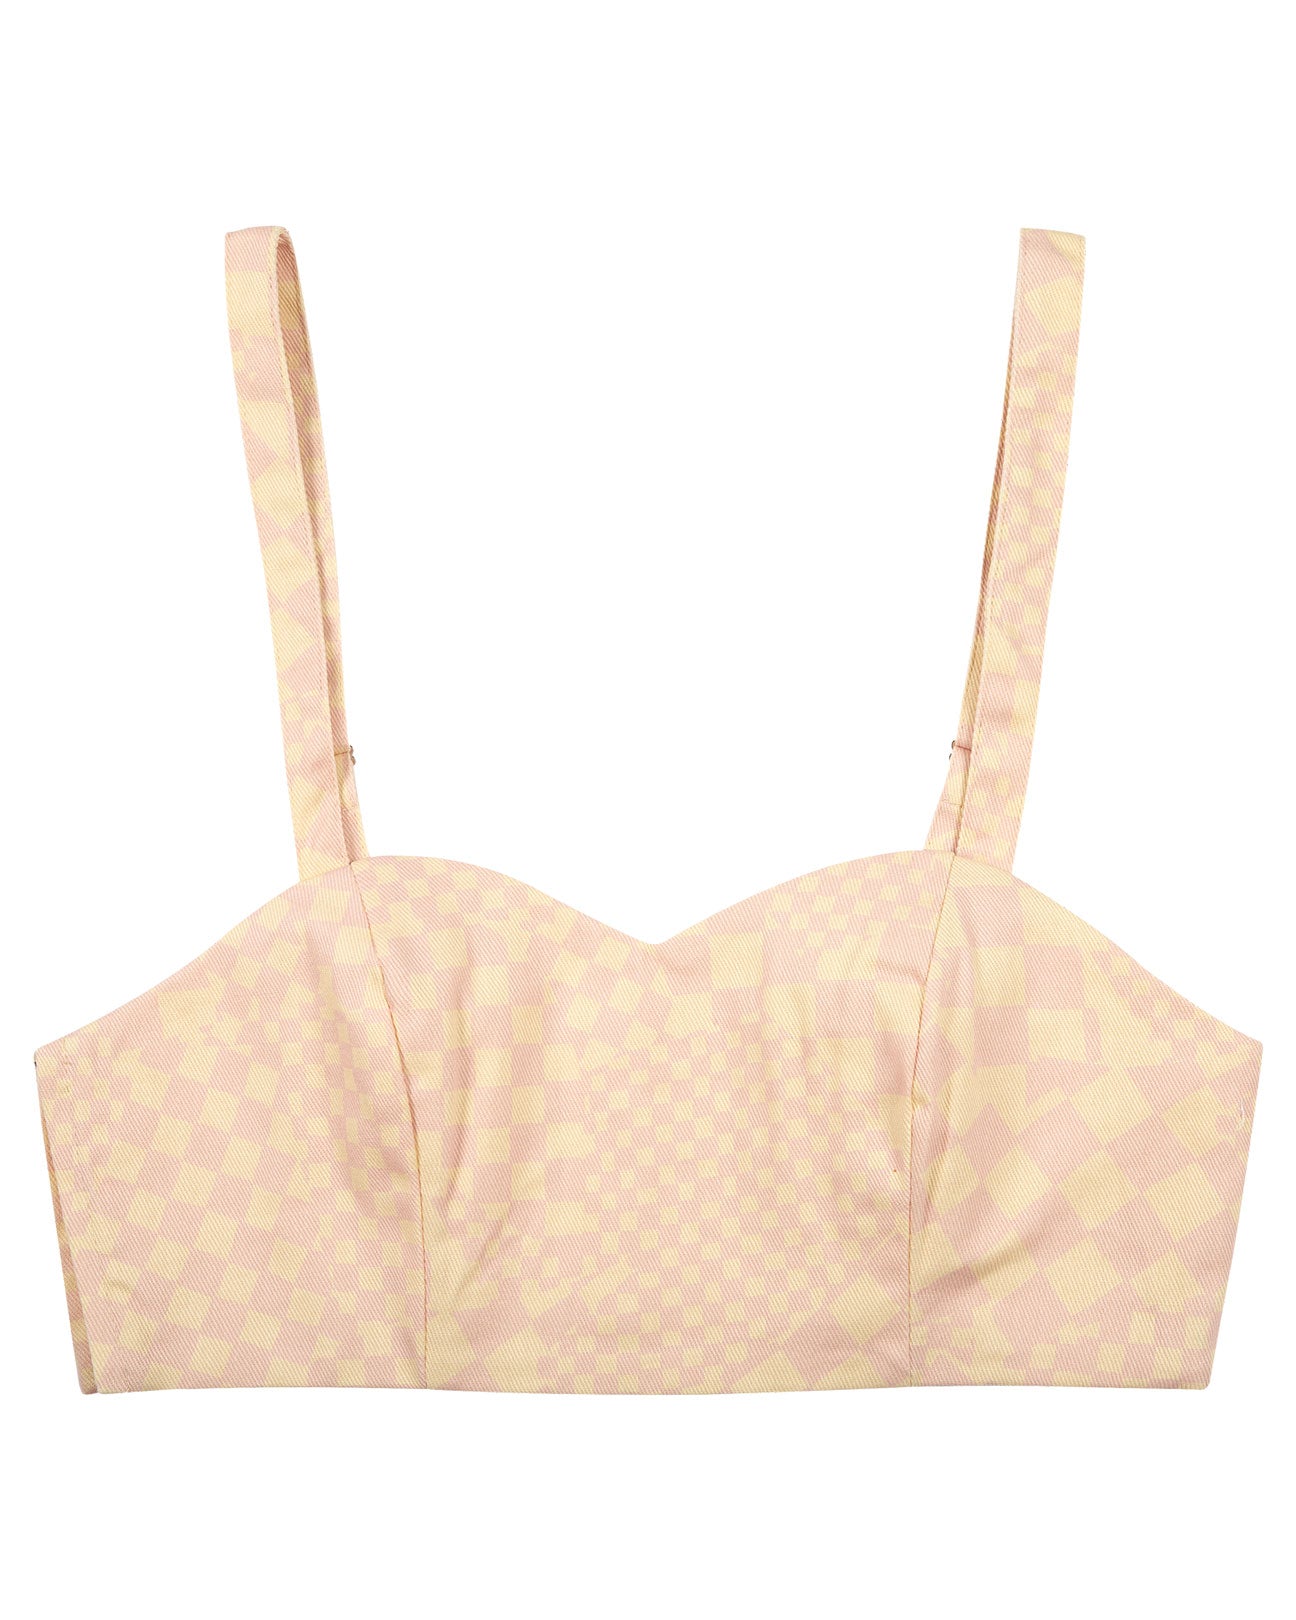 UNTITLED IN MOTION Sacra Top in Pink Check